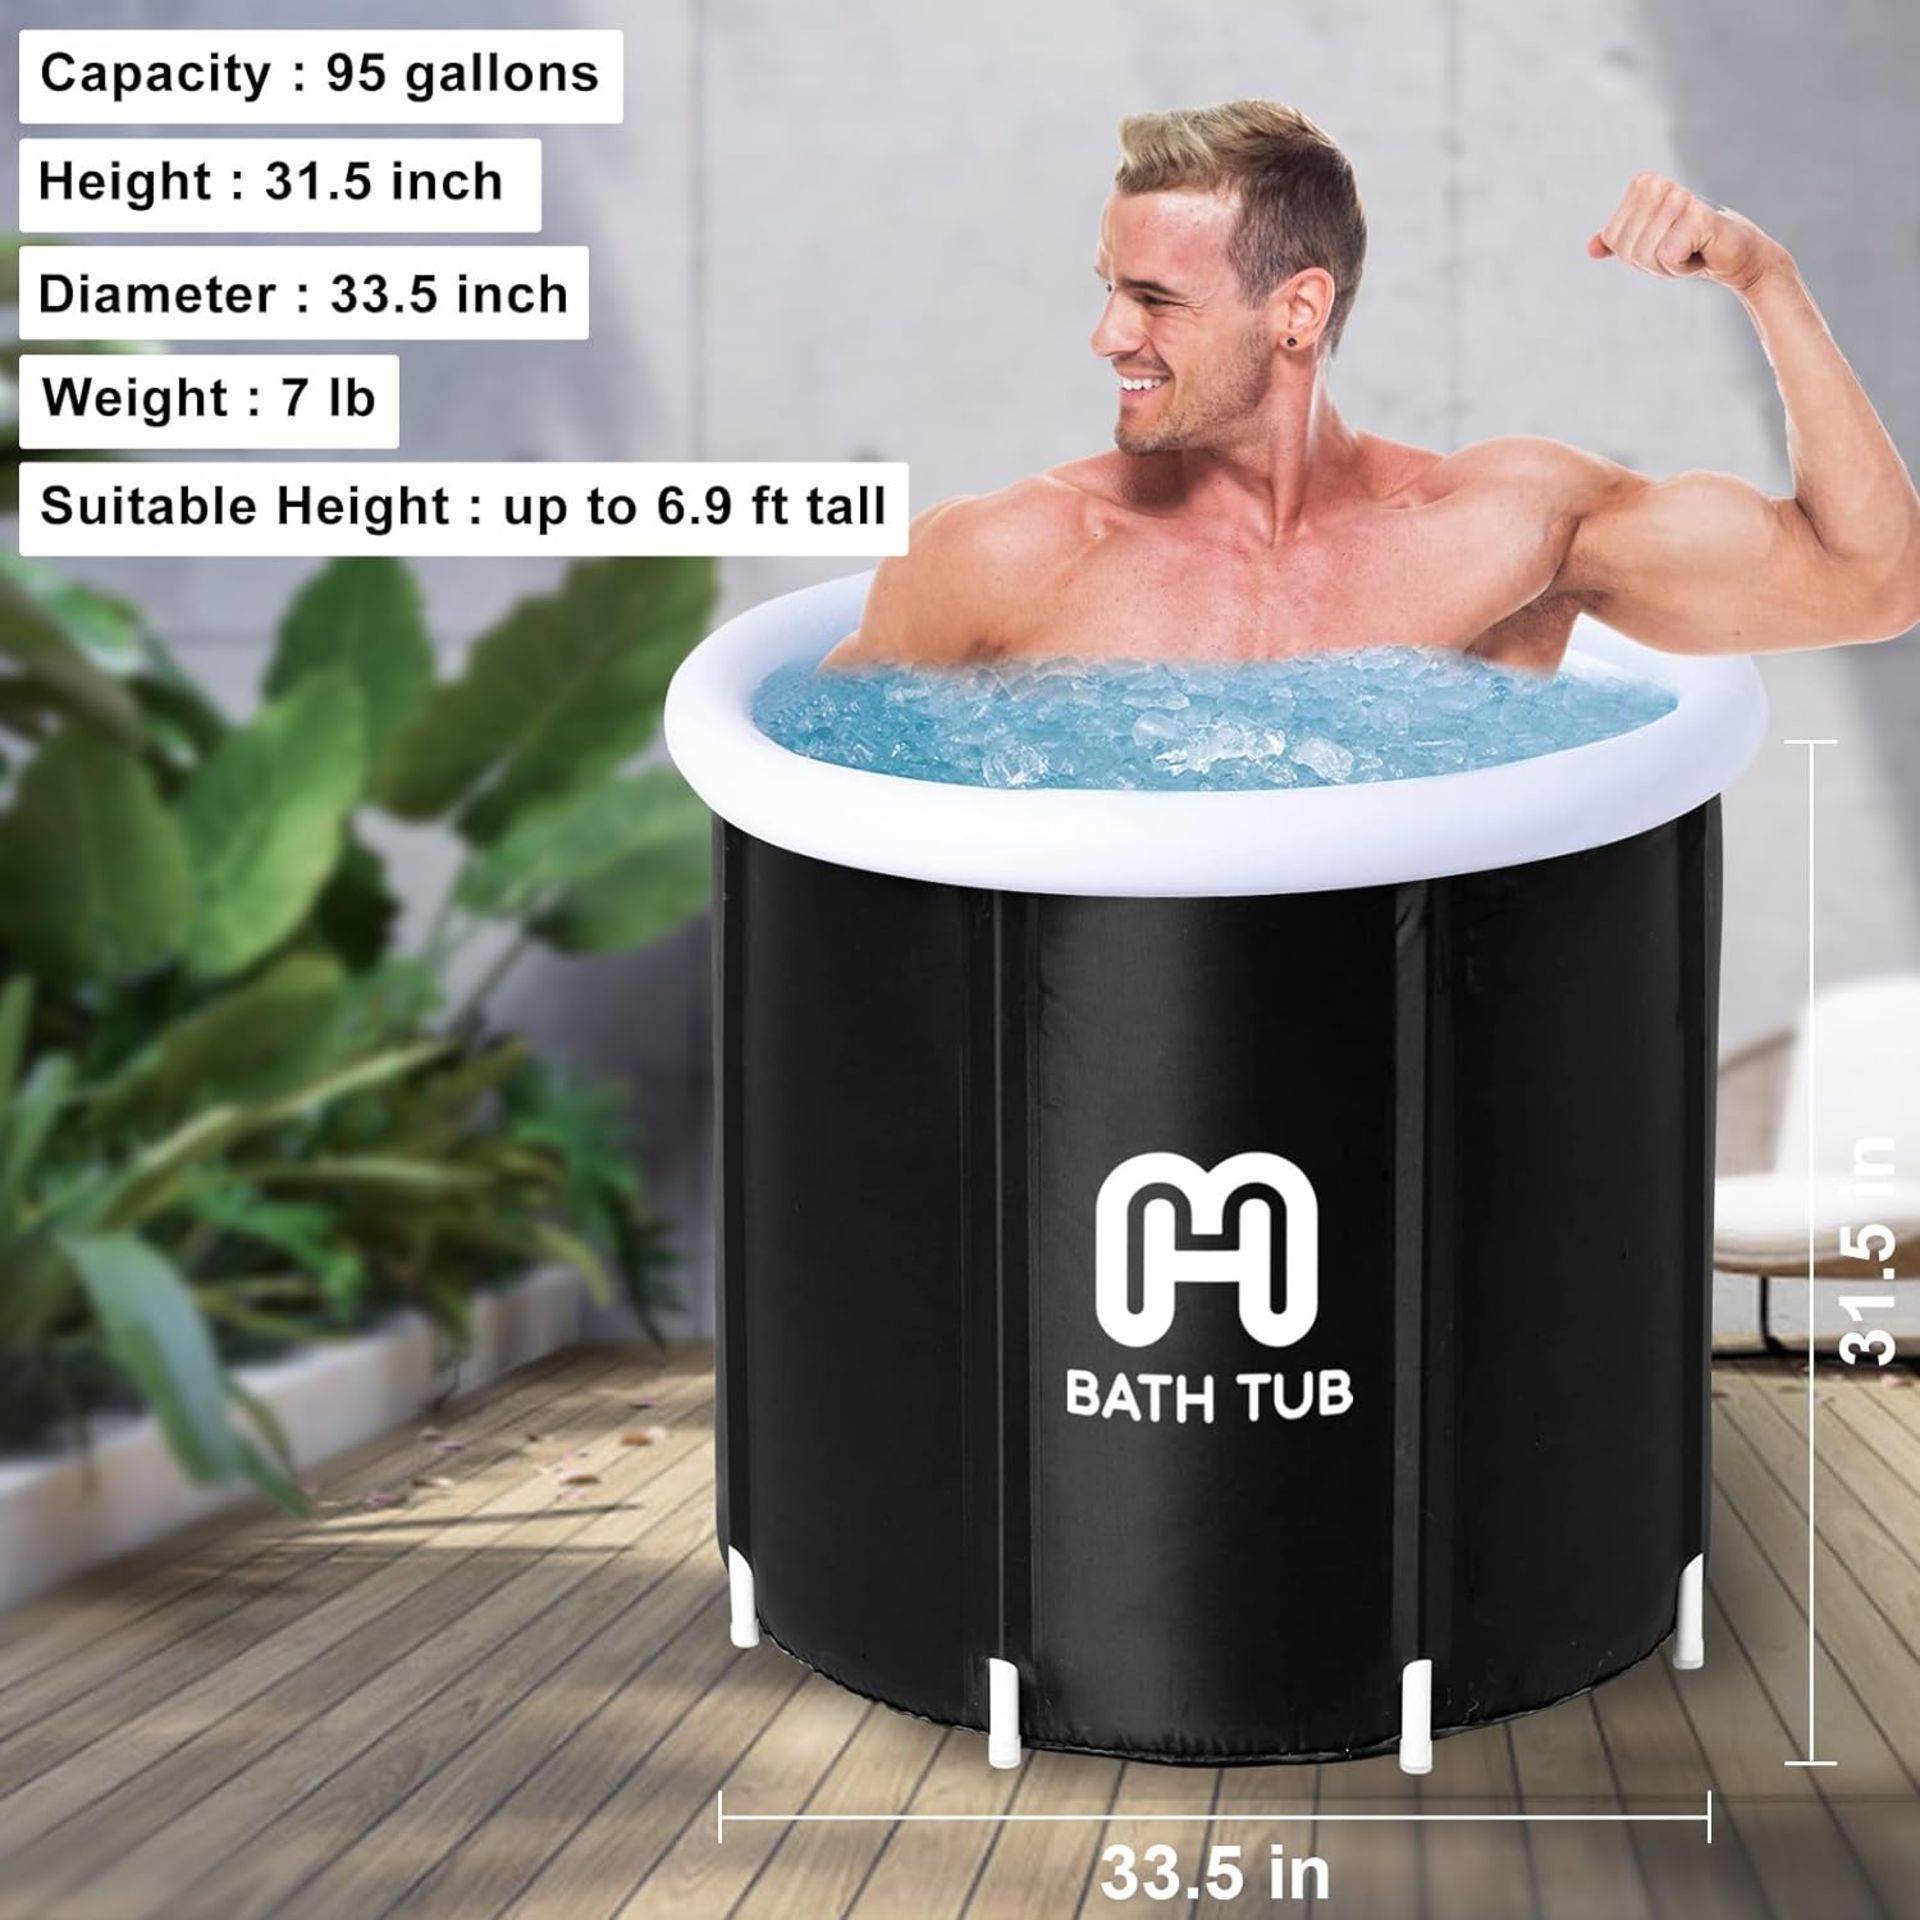 2x New & Boxed HotMax Ice Bath Tub for Recovery, Cold Plunge Tub for Athletes (S1-1) - Image 2 of 7